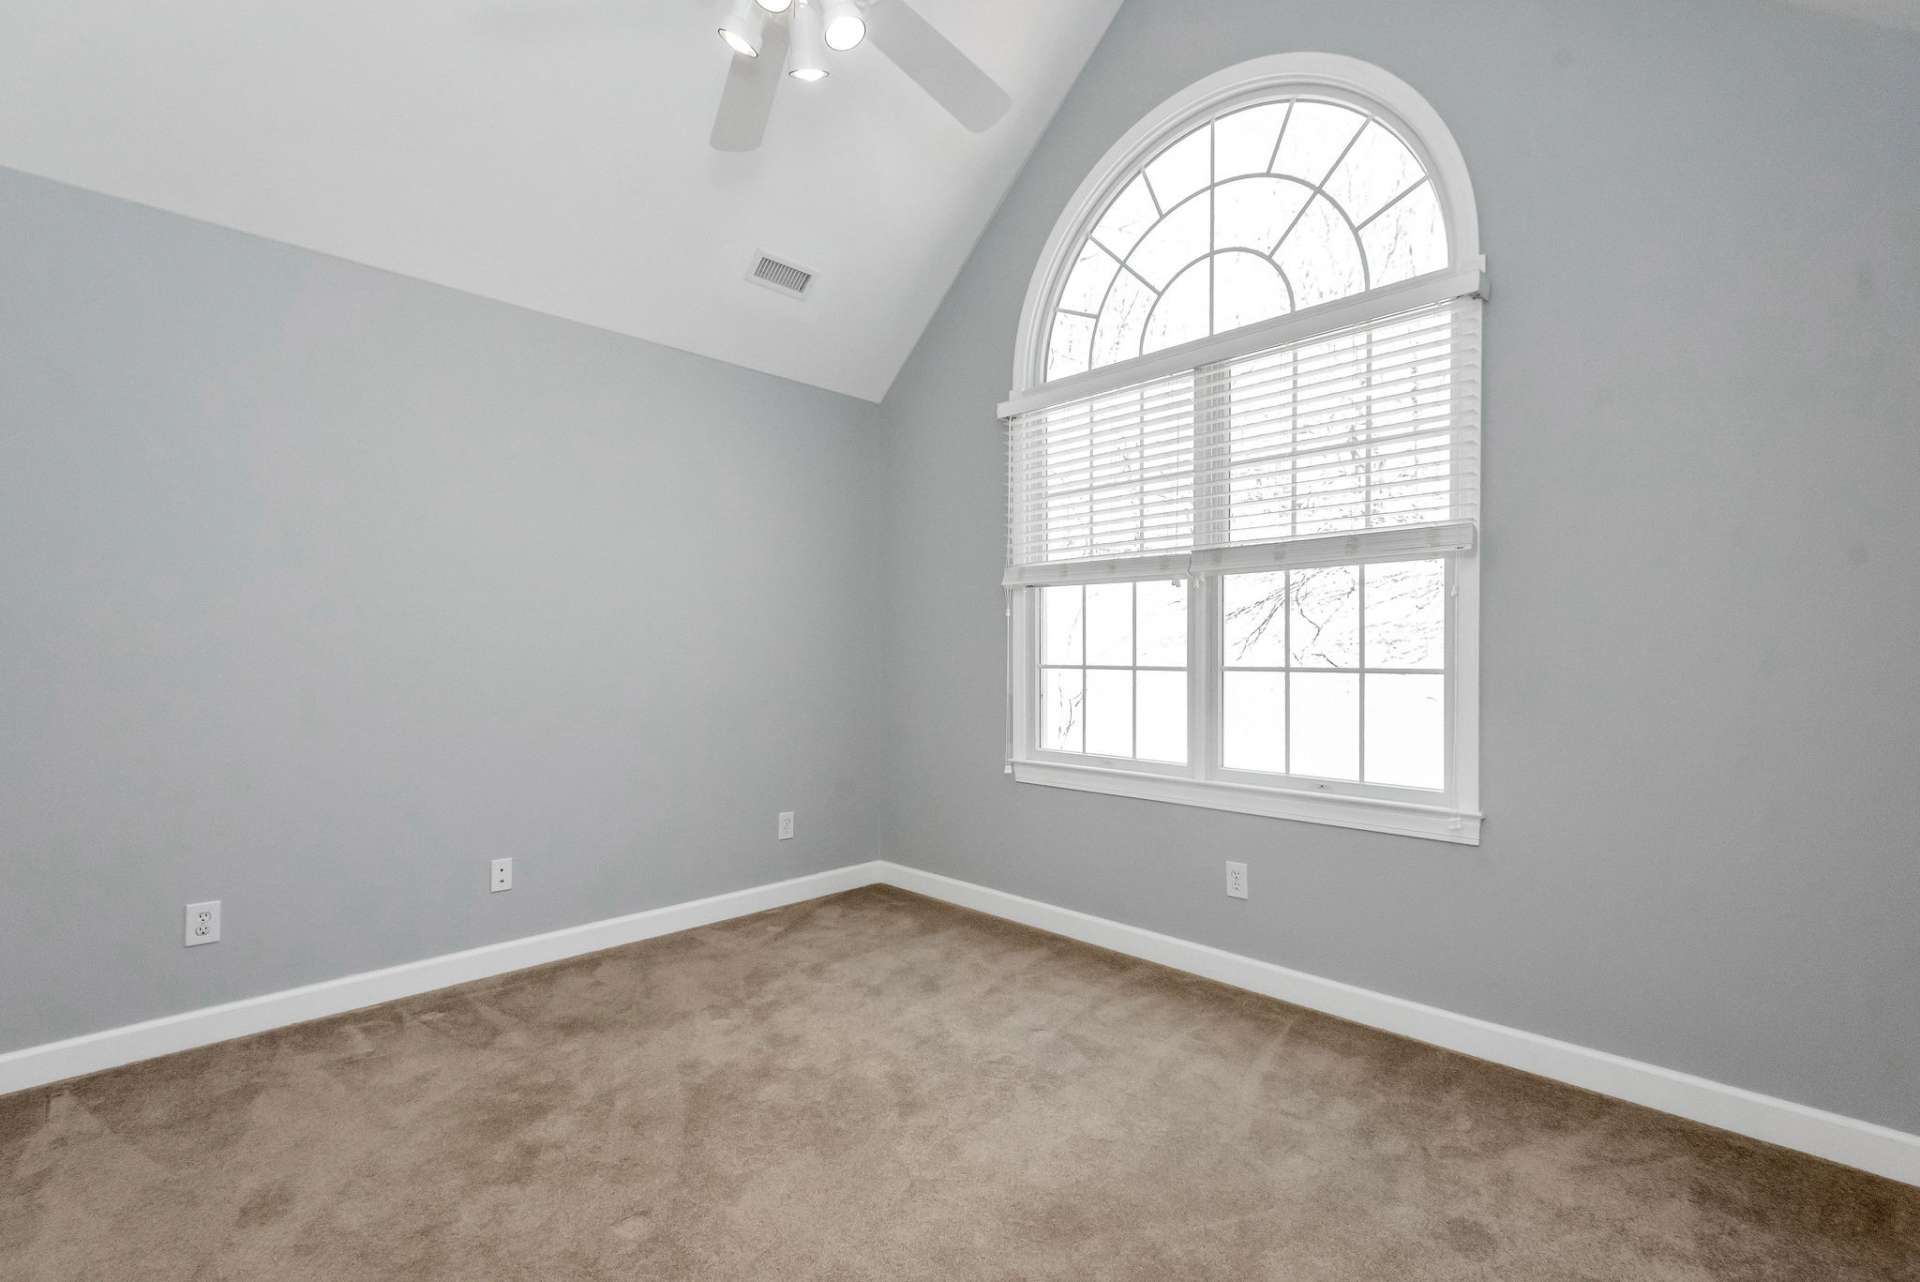 Upper Level Bedroom #3 - Another comfortable and inviting bedroom featuring soft carpeting underfoot and an elegant arched window, which floods the space with natural light and offers a charming view on the front side of the home. Includes walk-in closet.